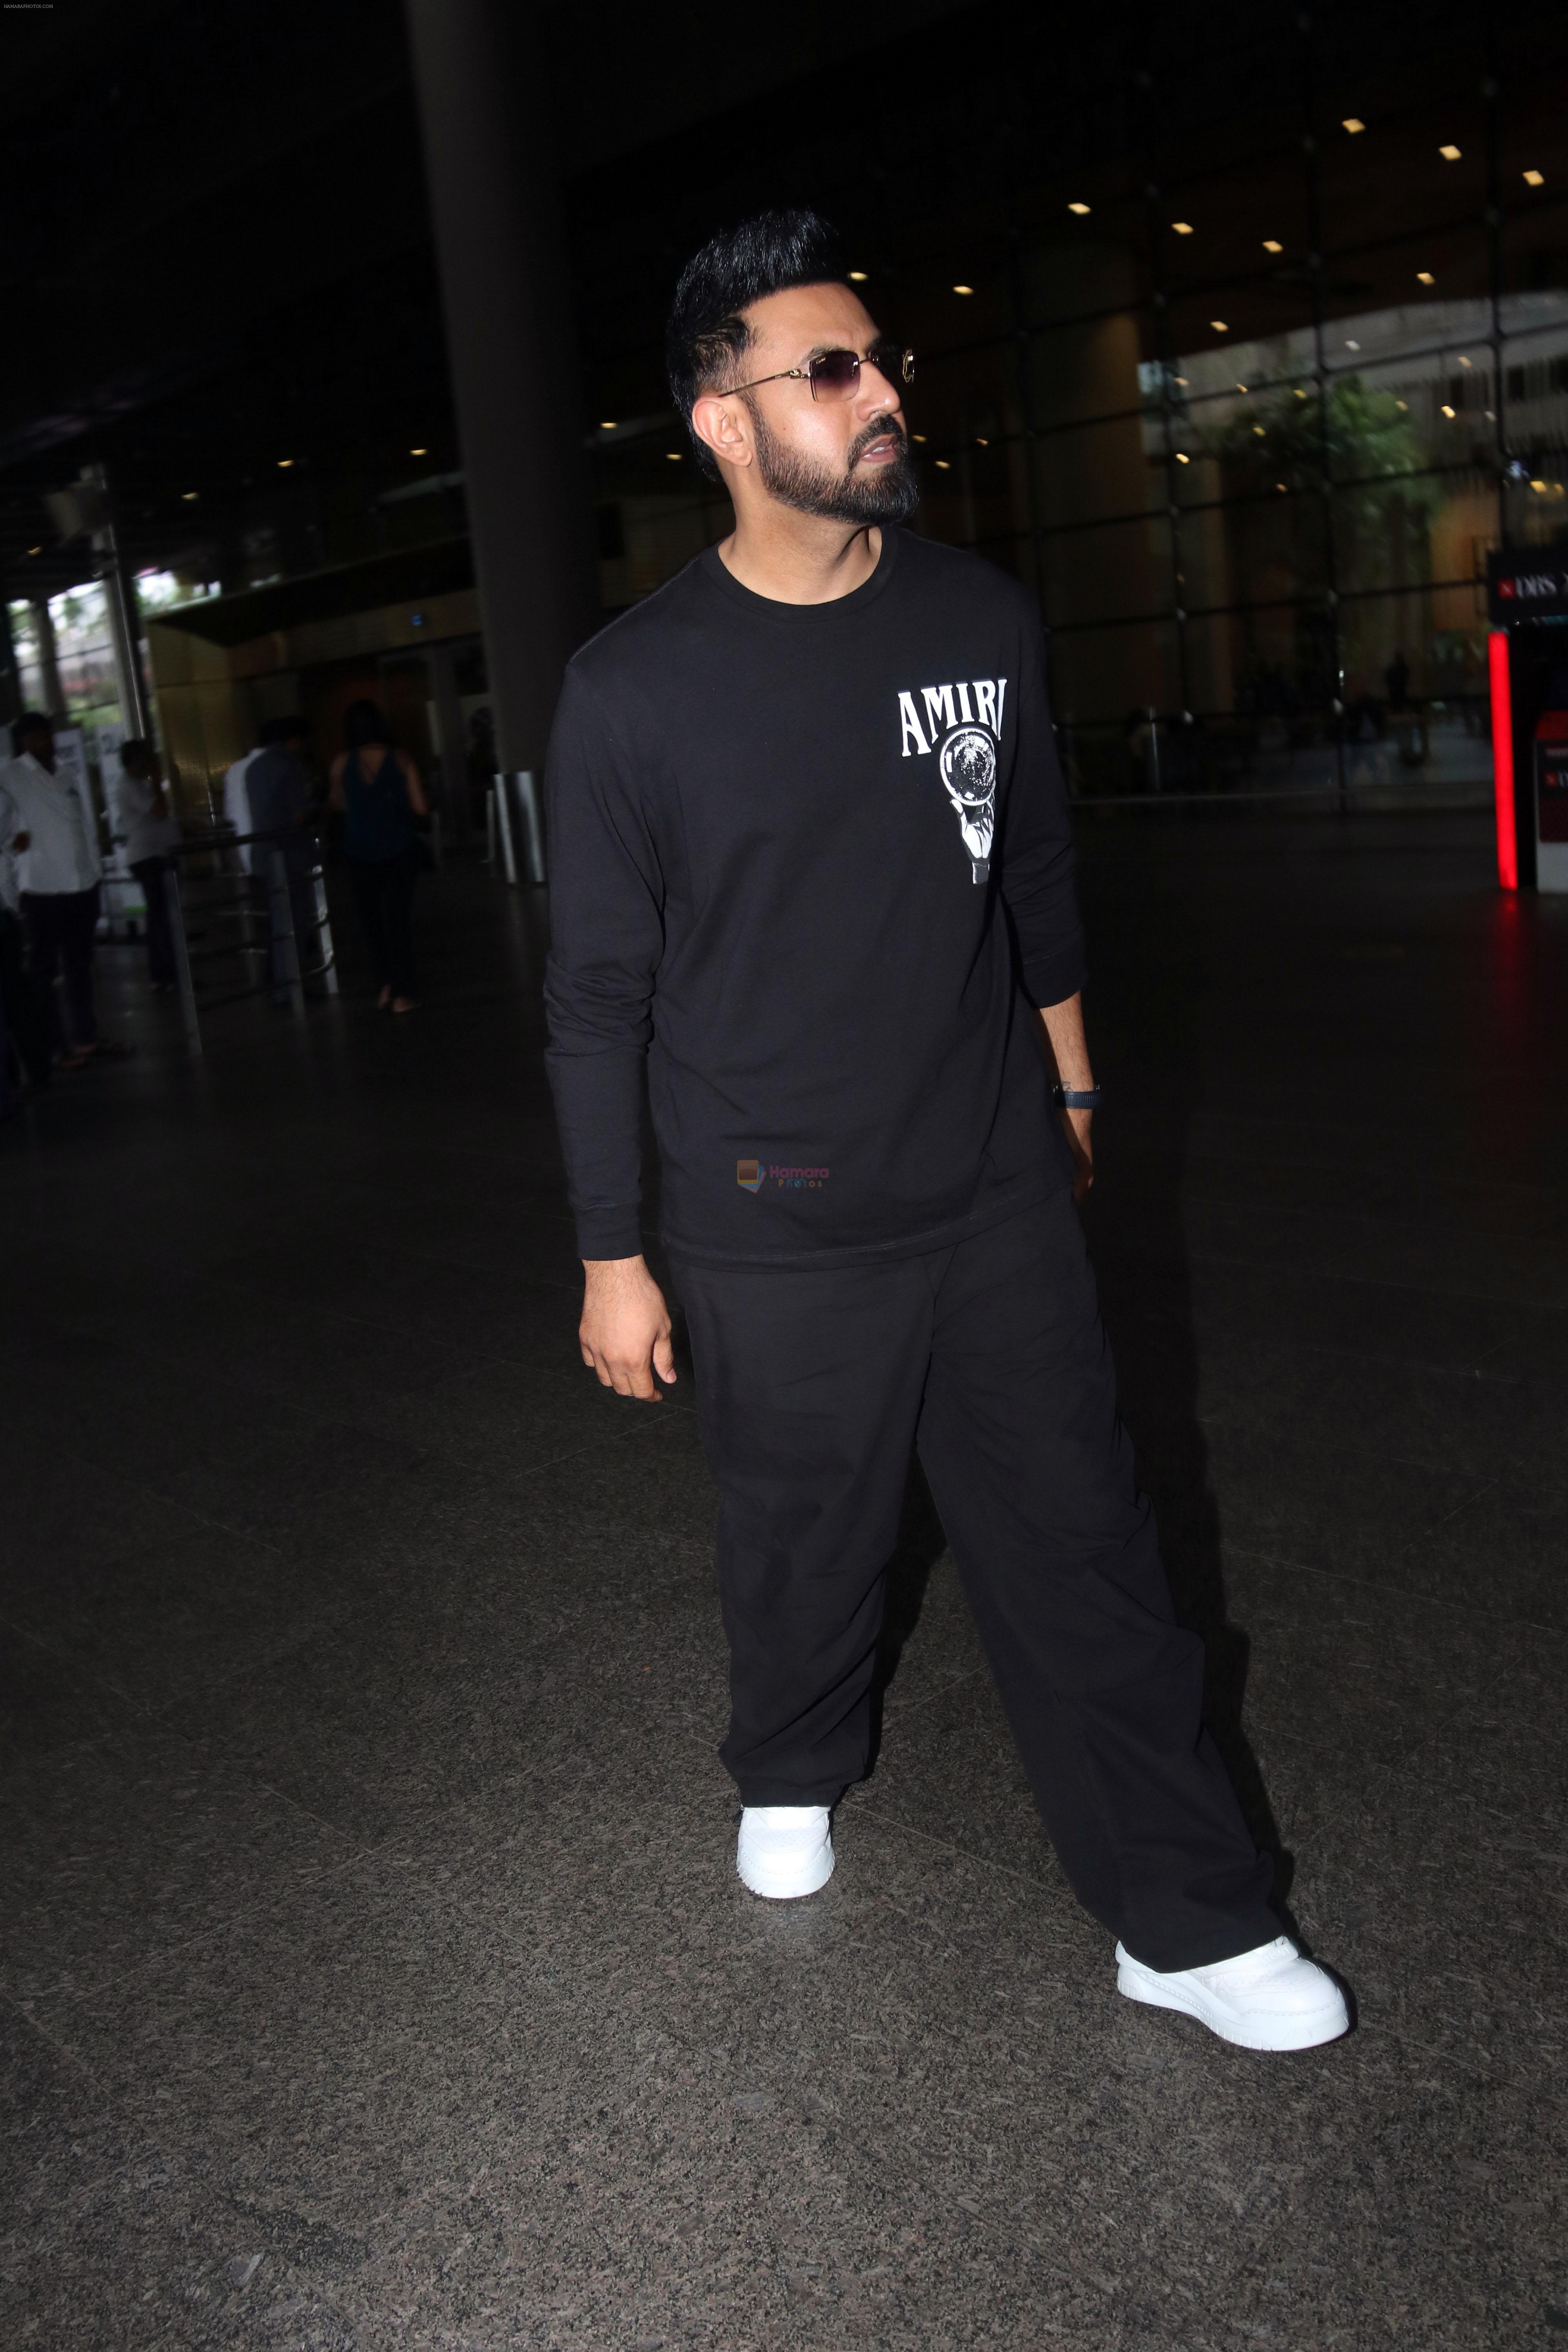 Gippy Grewal seen at the airport heading to Bigg Boss for Carry on Jatta 3 film promotions on 1 July 2023